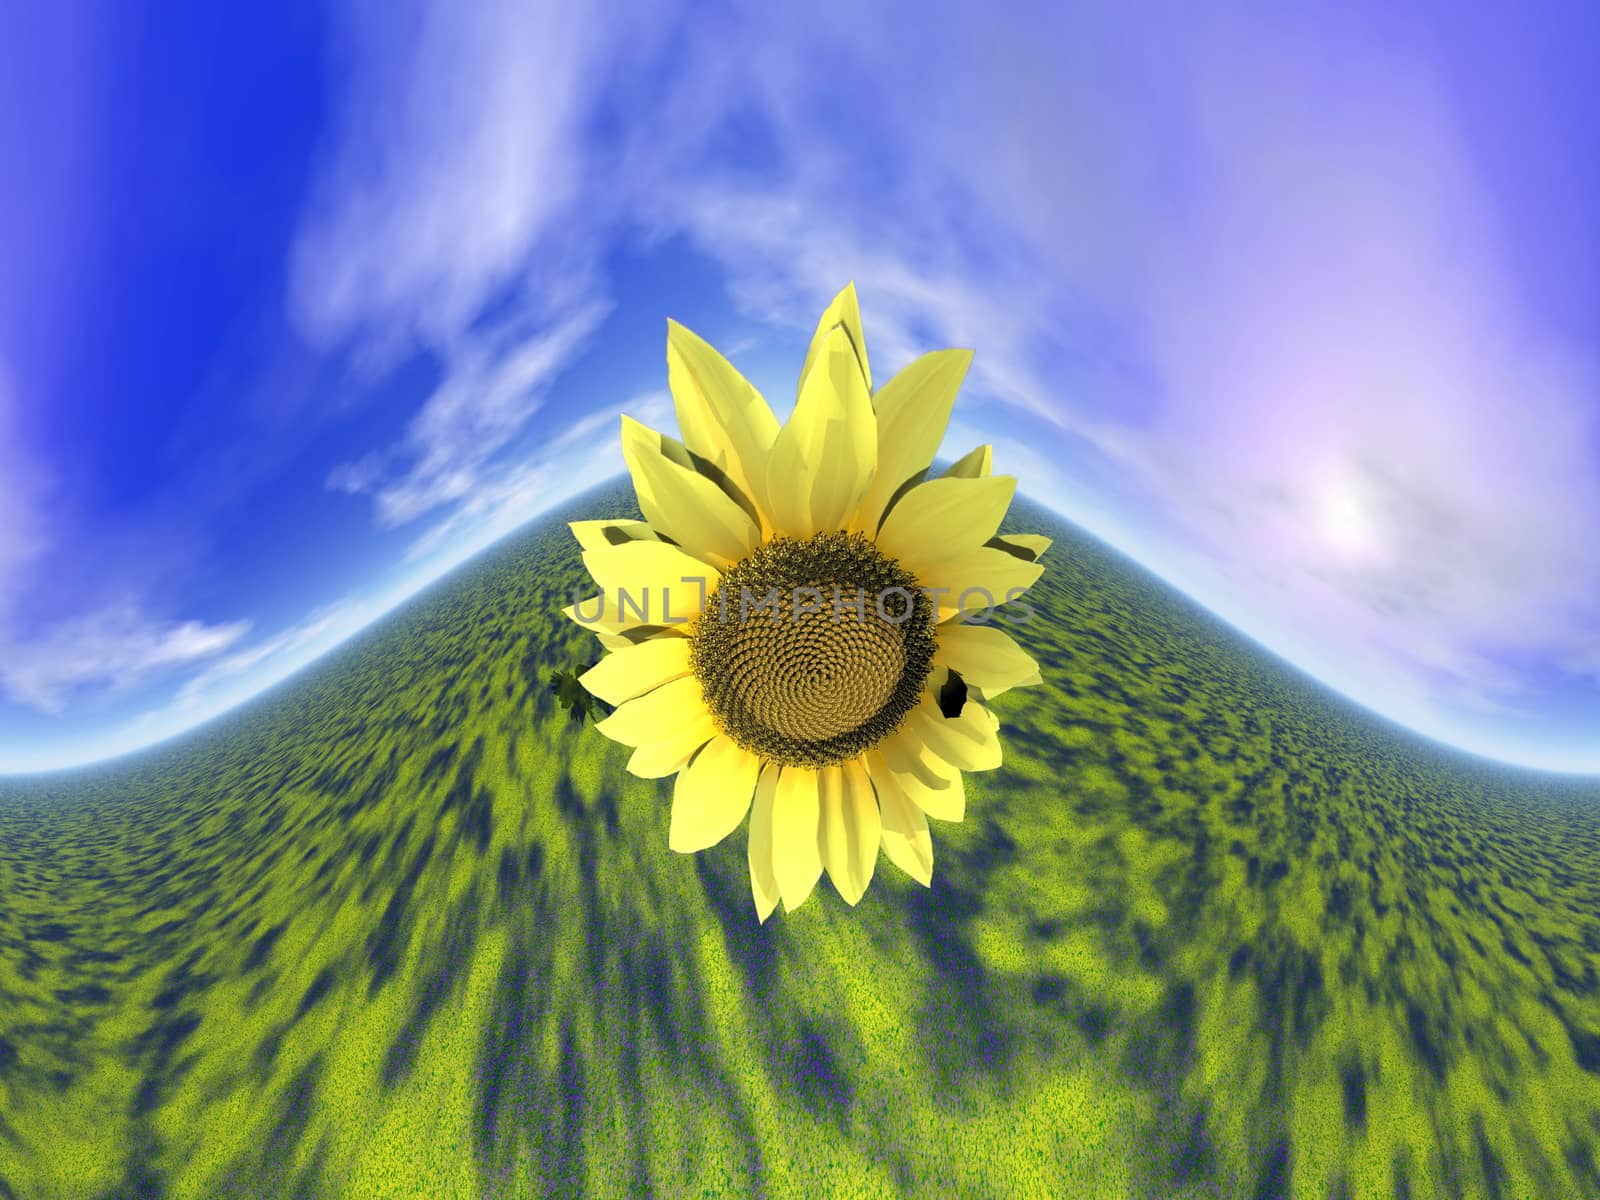 Sunflower and sky - 3D render by Elenaphotos21